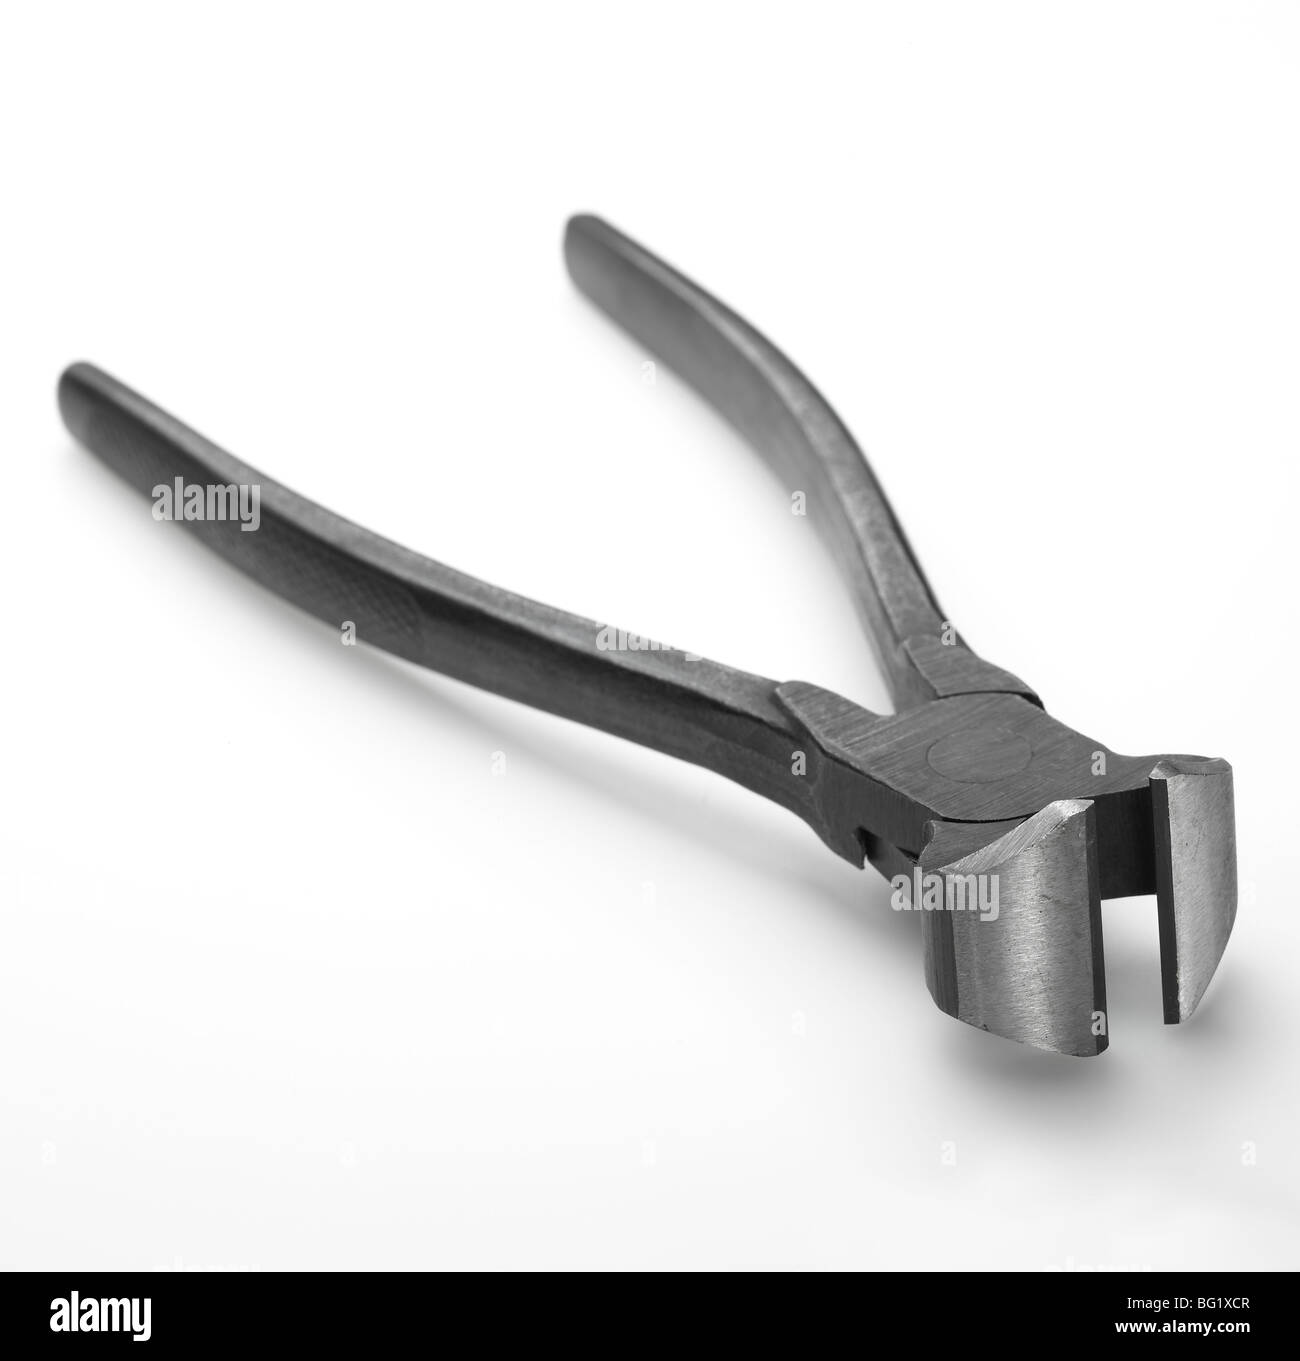 Wire cutter on white background. Stock Photo